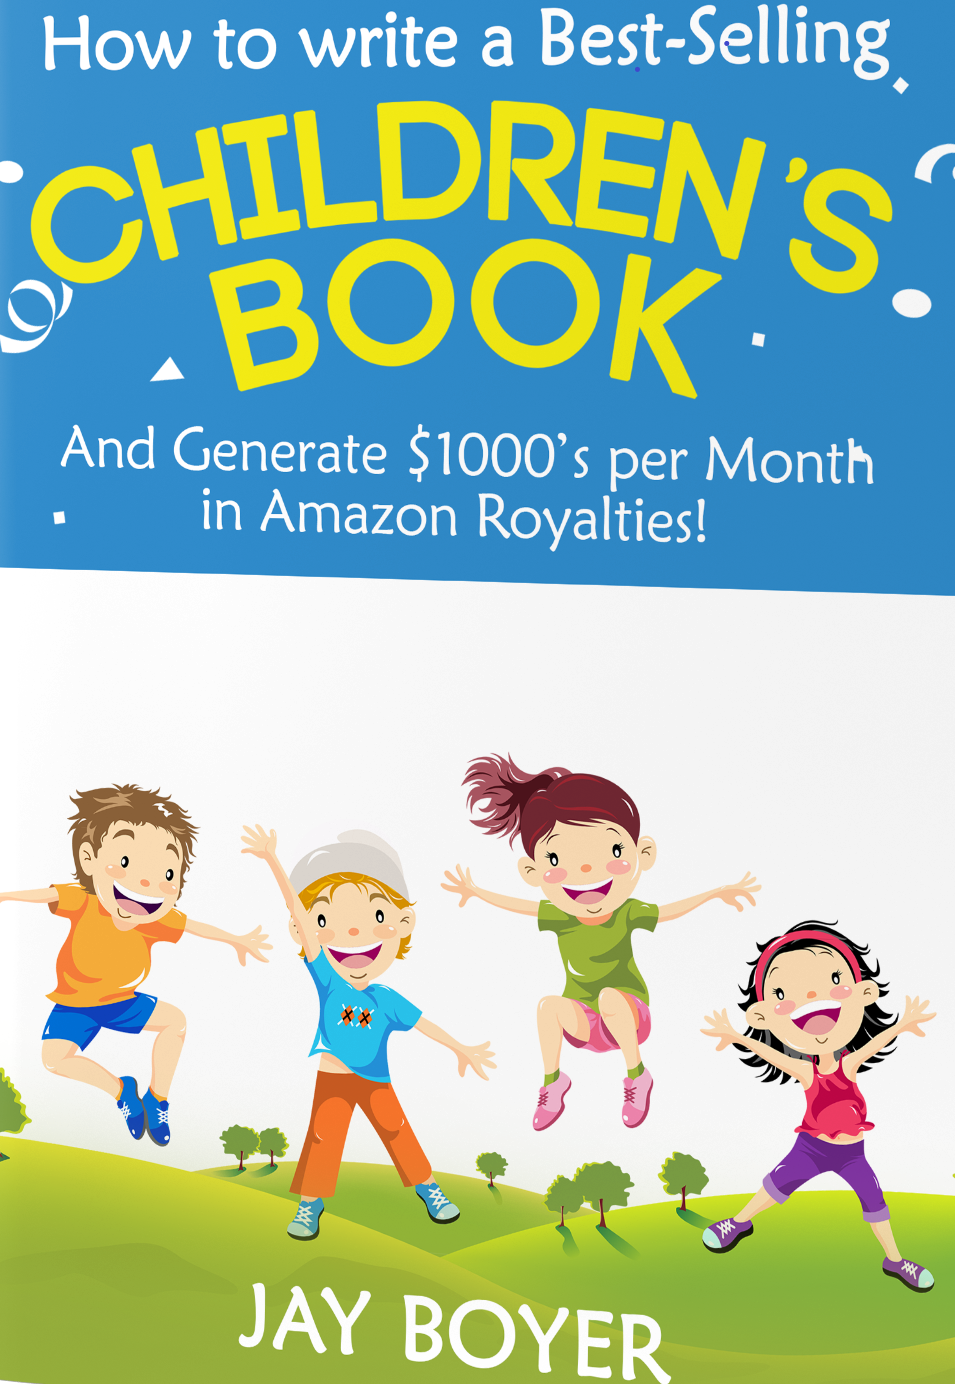 This Guide Shows How To Design/Publish Children's Books With Ease On Amazon KDP